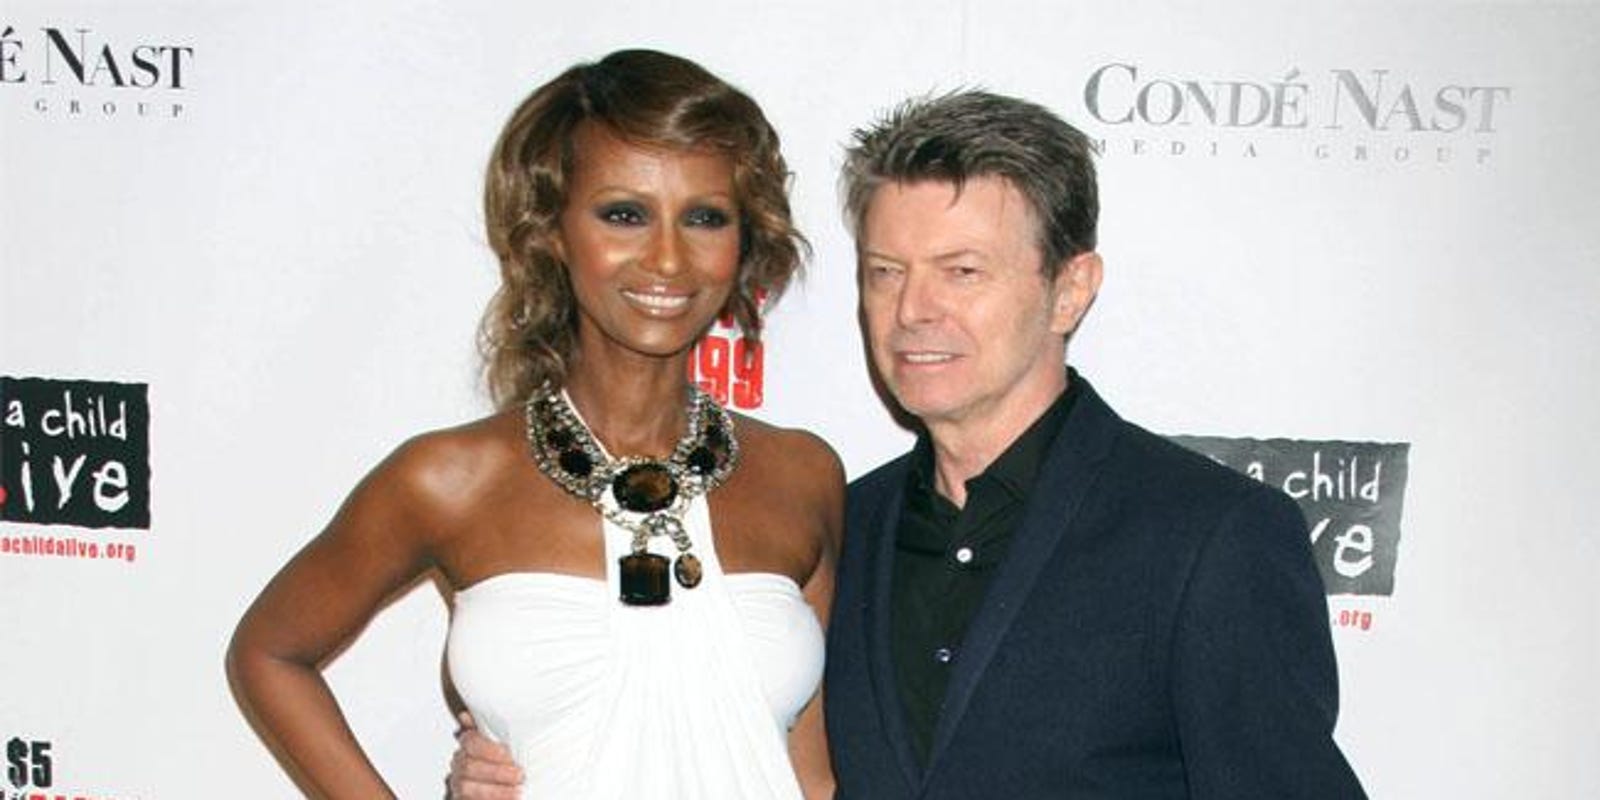 Texas Battle Bold Porn - David Bowie was lonely before meeting Iman